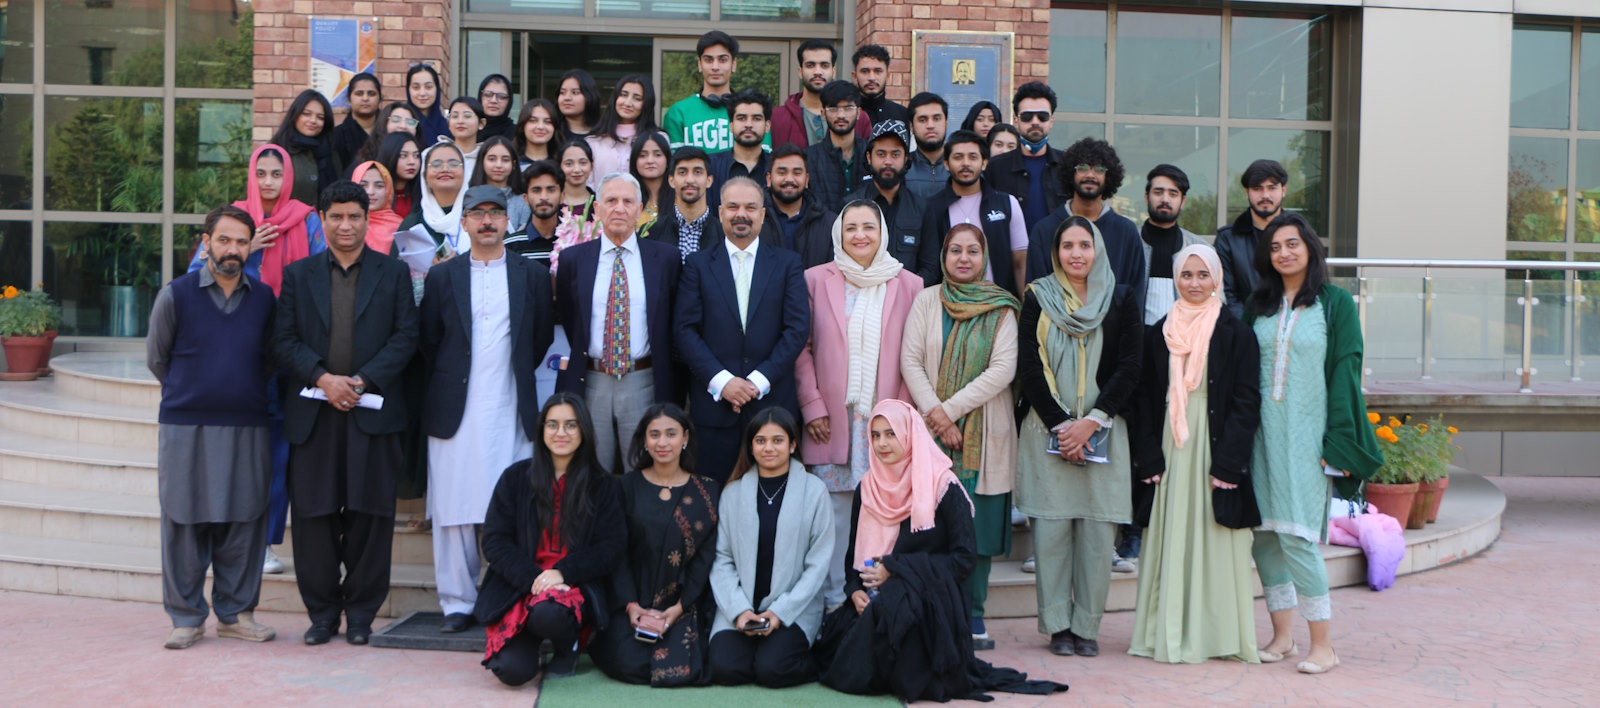 The famous all rounder of Pakistan Cricket Team Mr. Majid Jahangir Khan had an interactive session with the students on the topic - Leadership and Ethics in Sports.